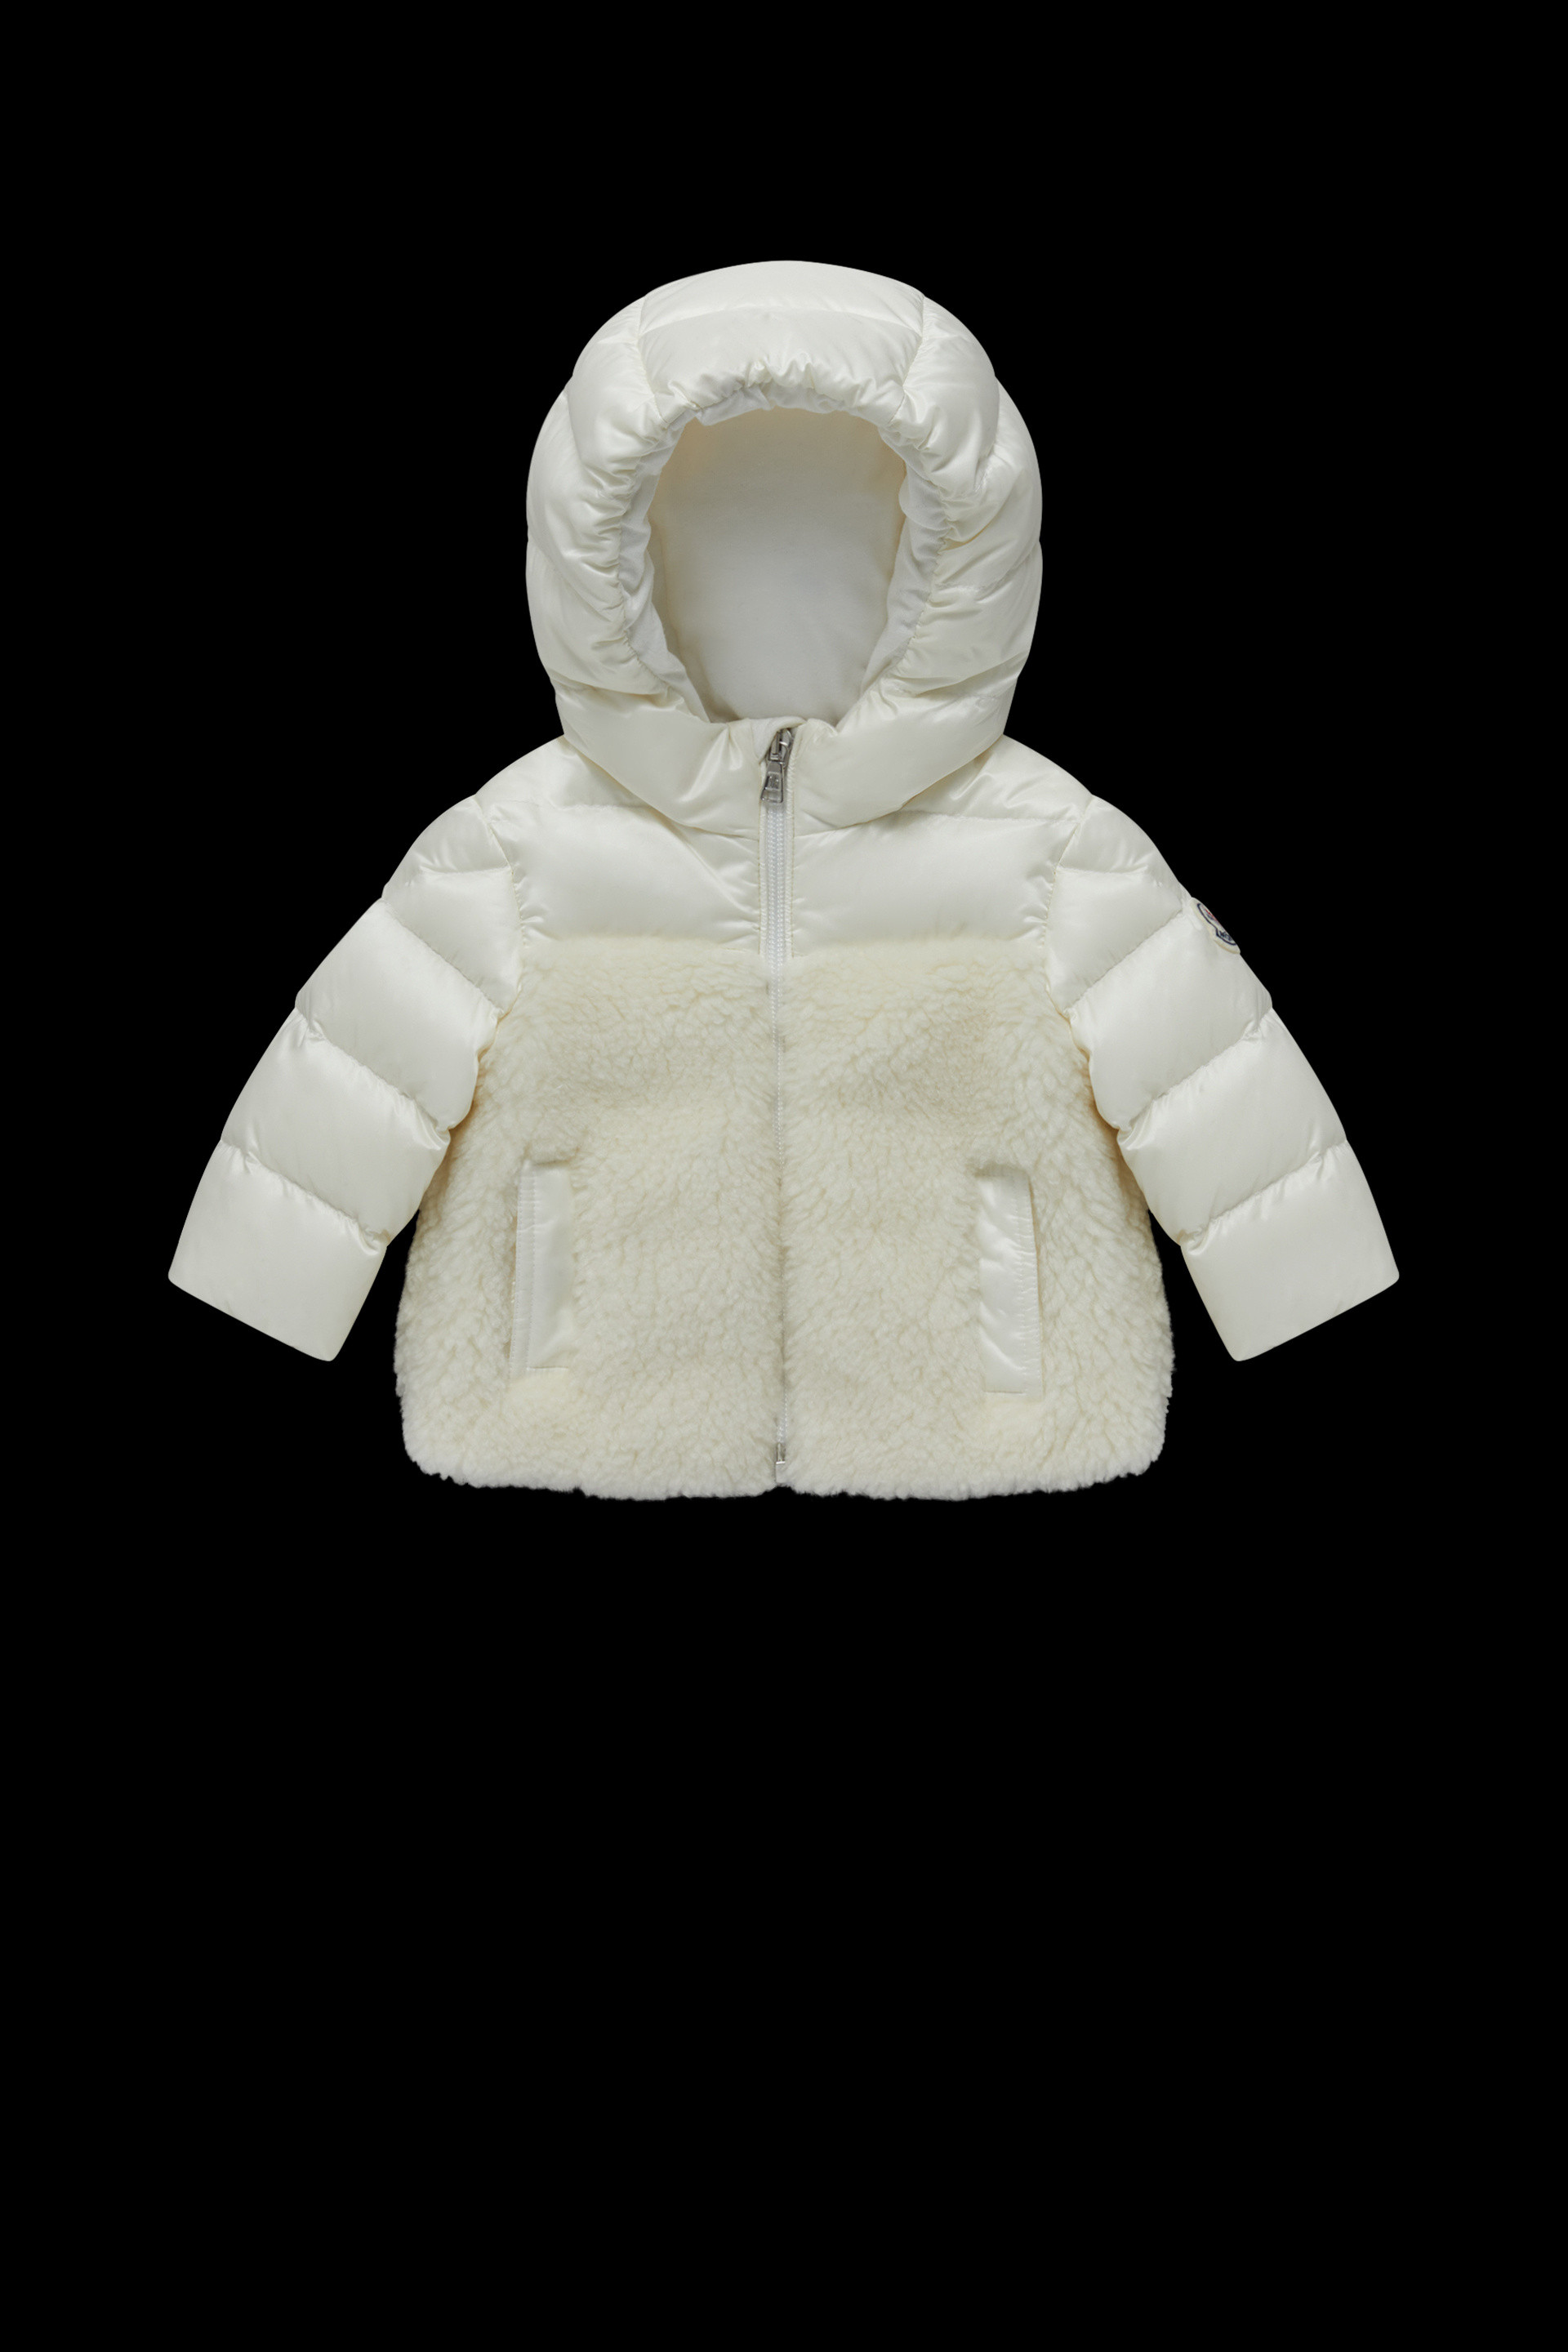 Pin on Baby Girls Winter Jackets